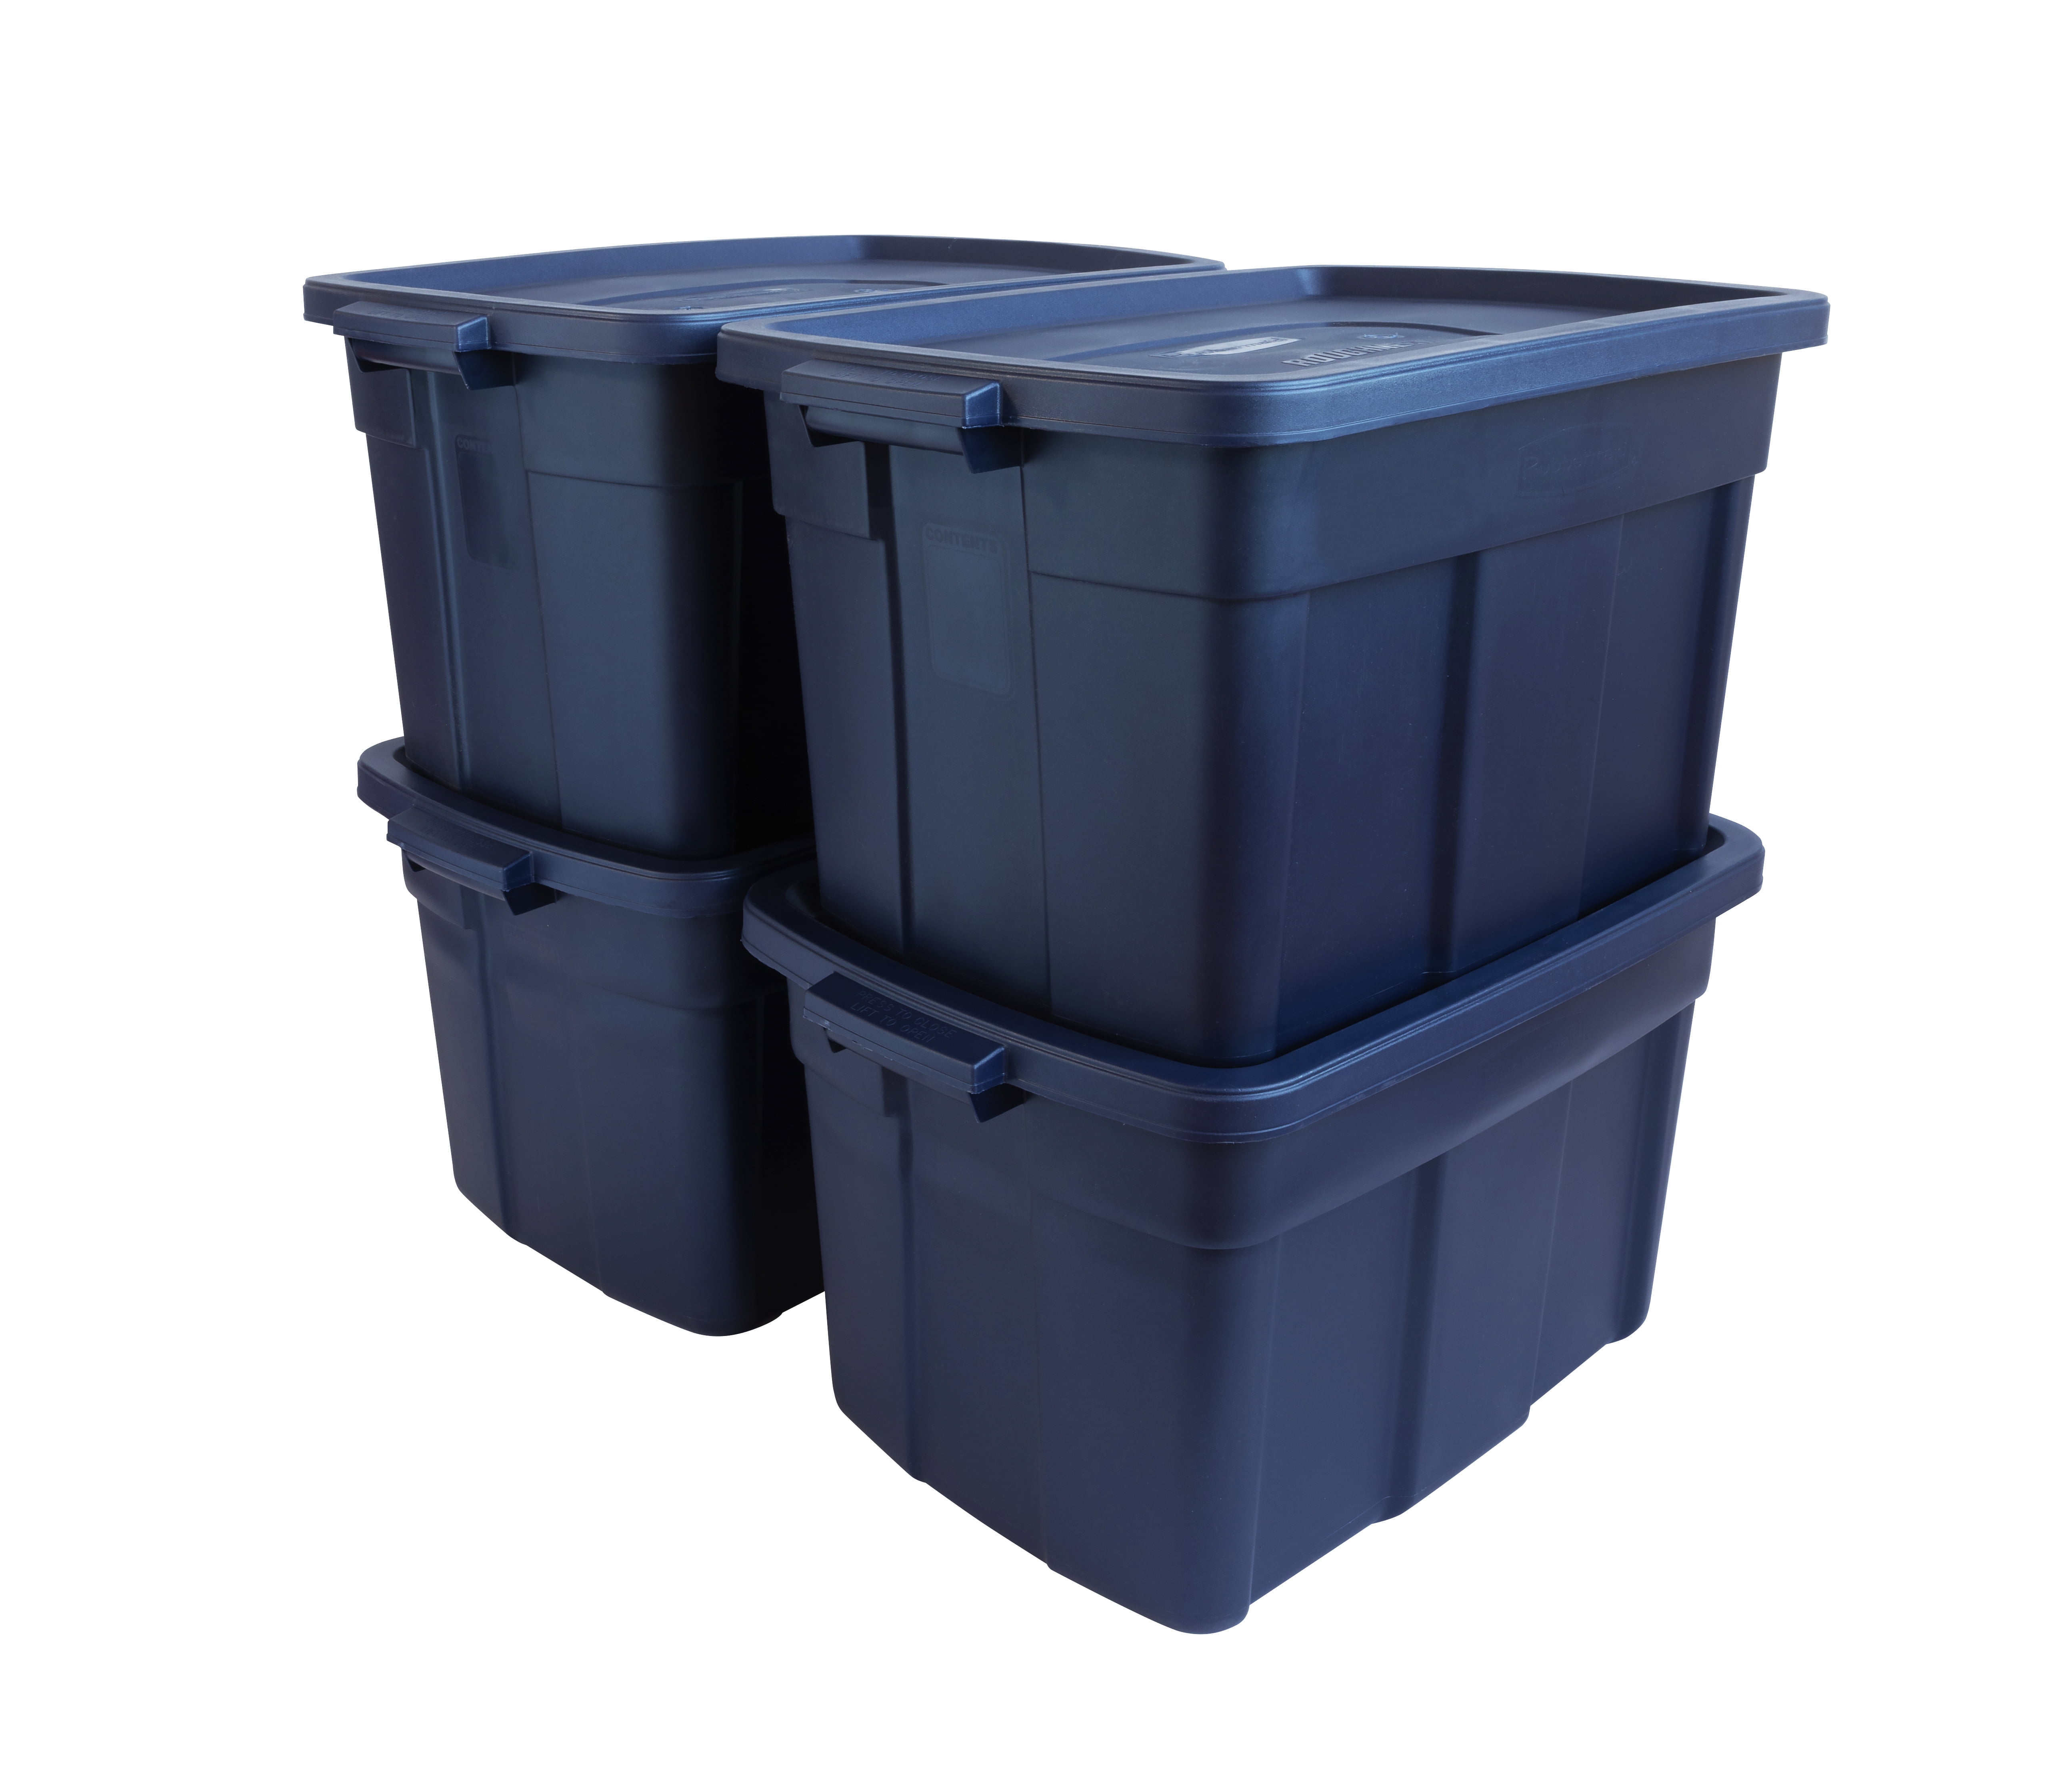 This Husky 25 Gal. heavy duty stackable storage tote is designed